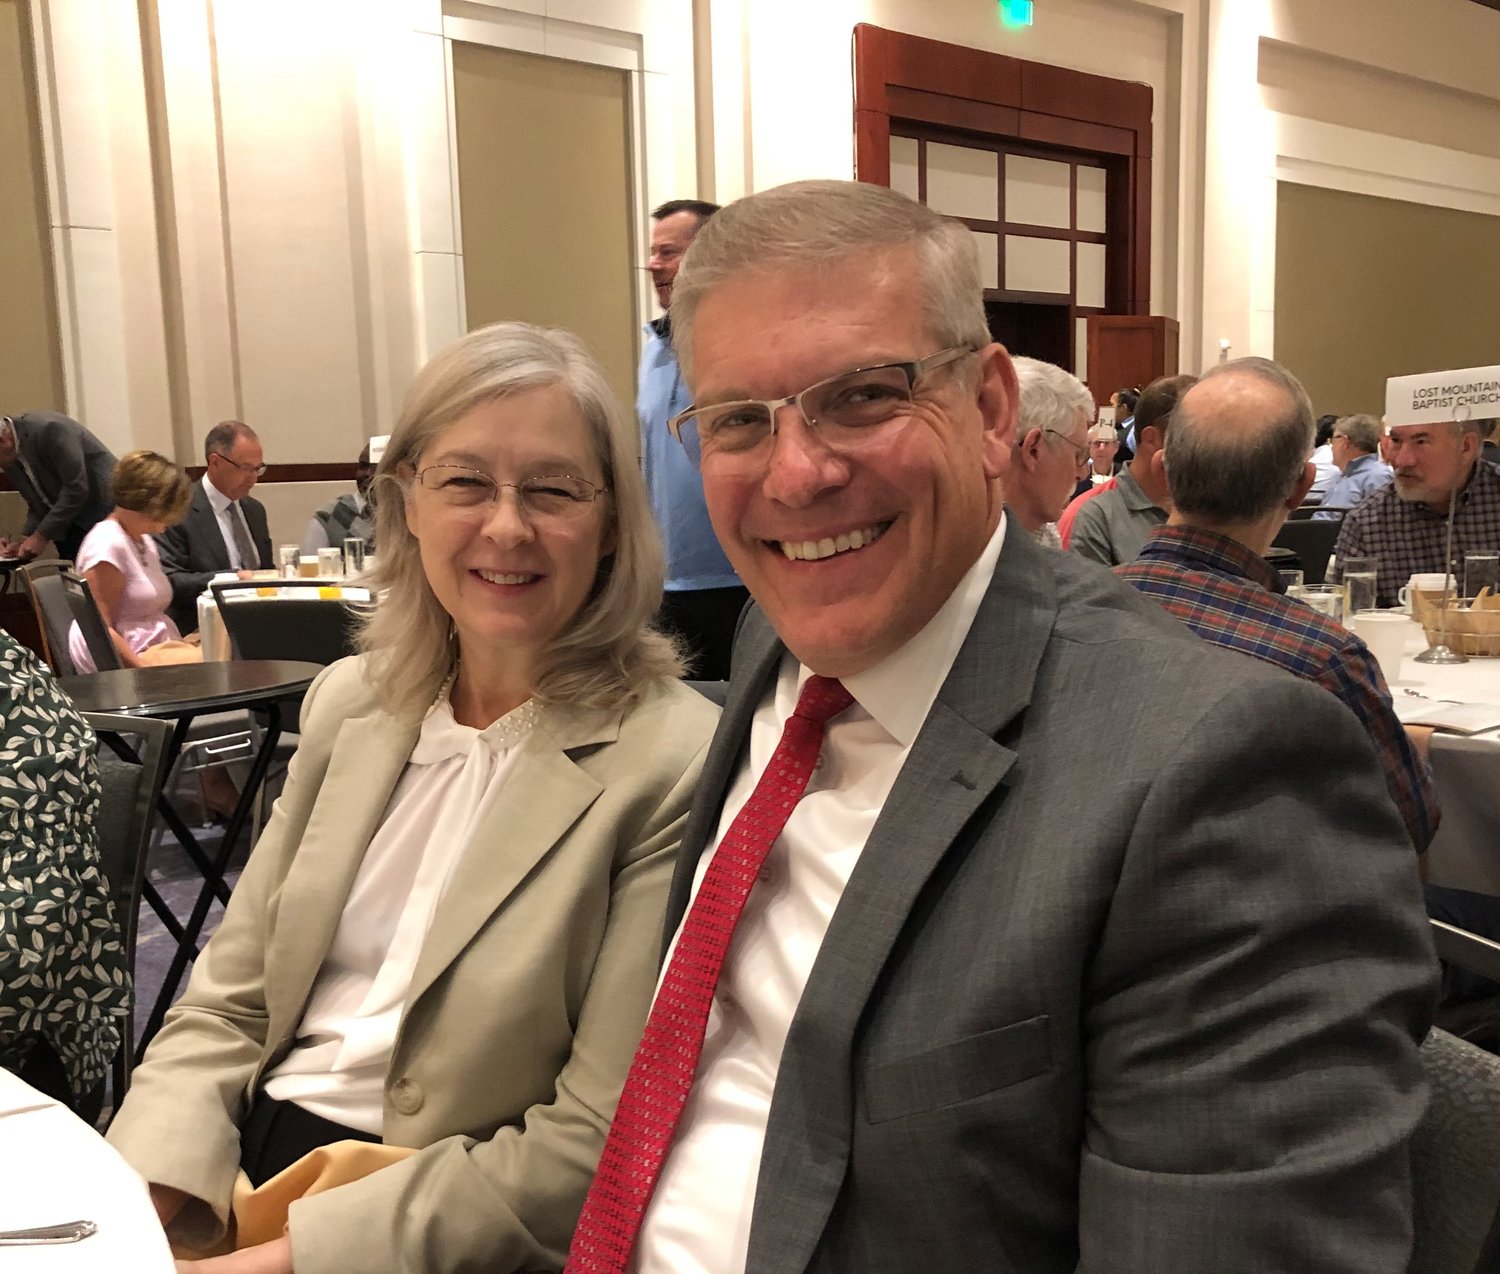 U.S. Rep. Barry Loudermilk (R-Ga.) and his wife, Desiree, attend the Cobb County Prayer Breakfast, Thursday, May 5, 2022. (Photo/J. Gerald Harris)